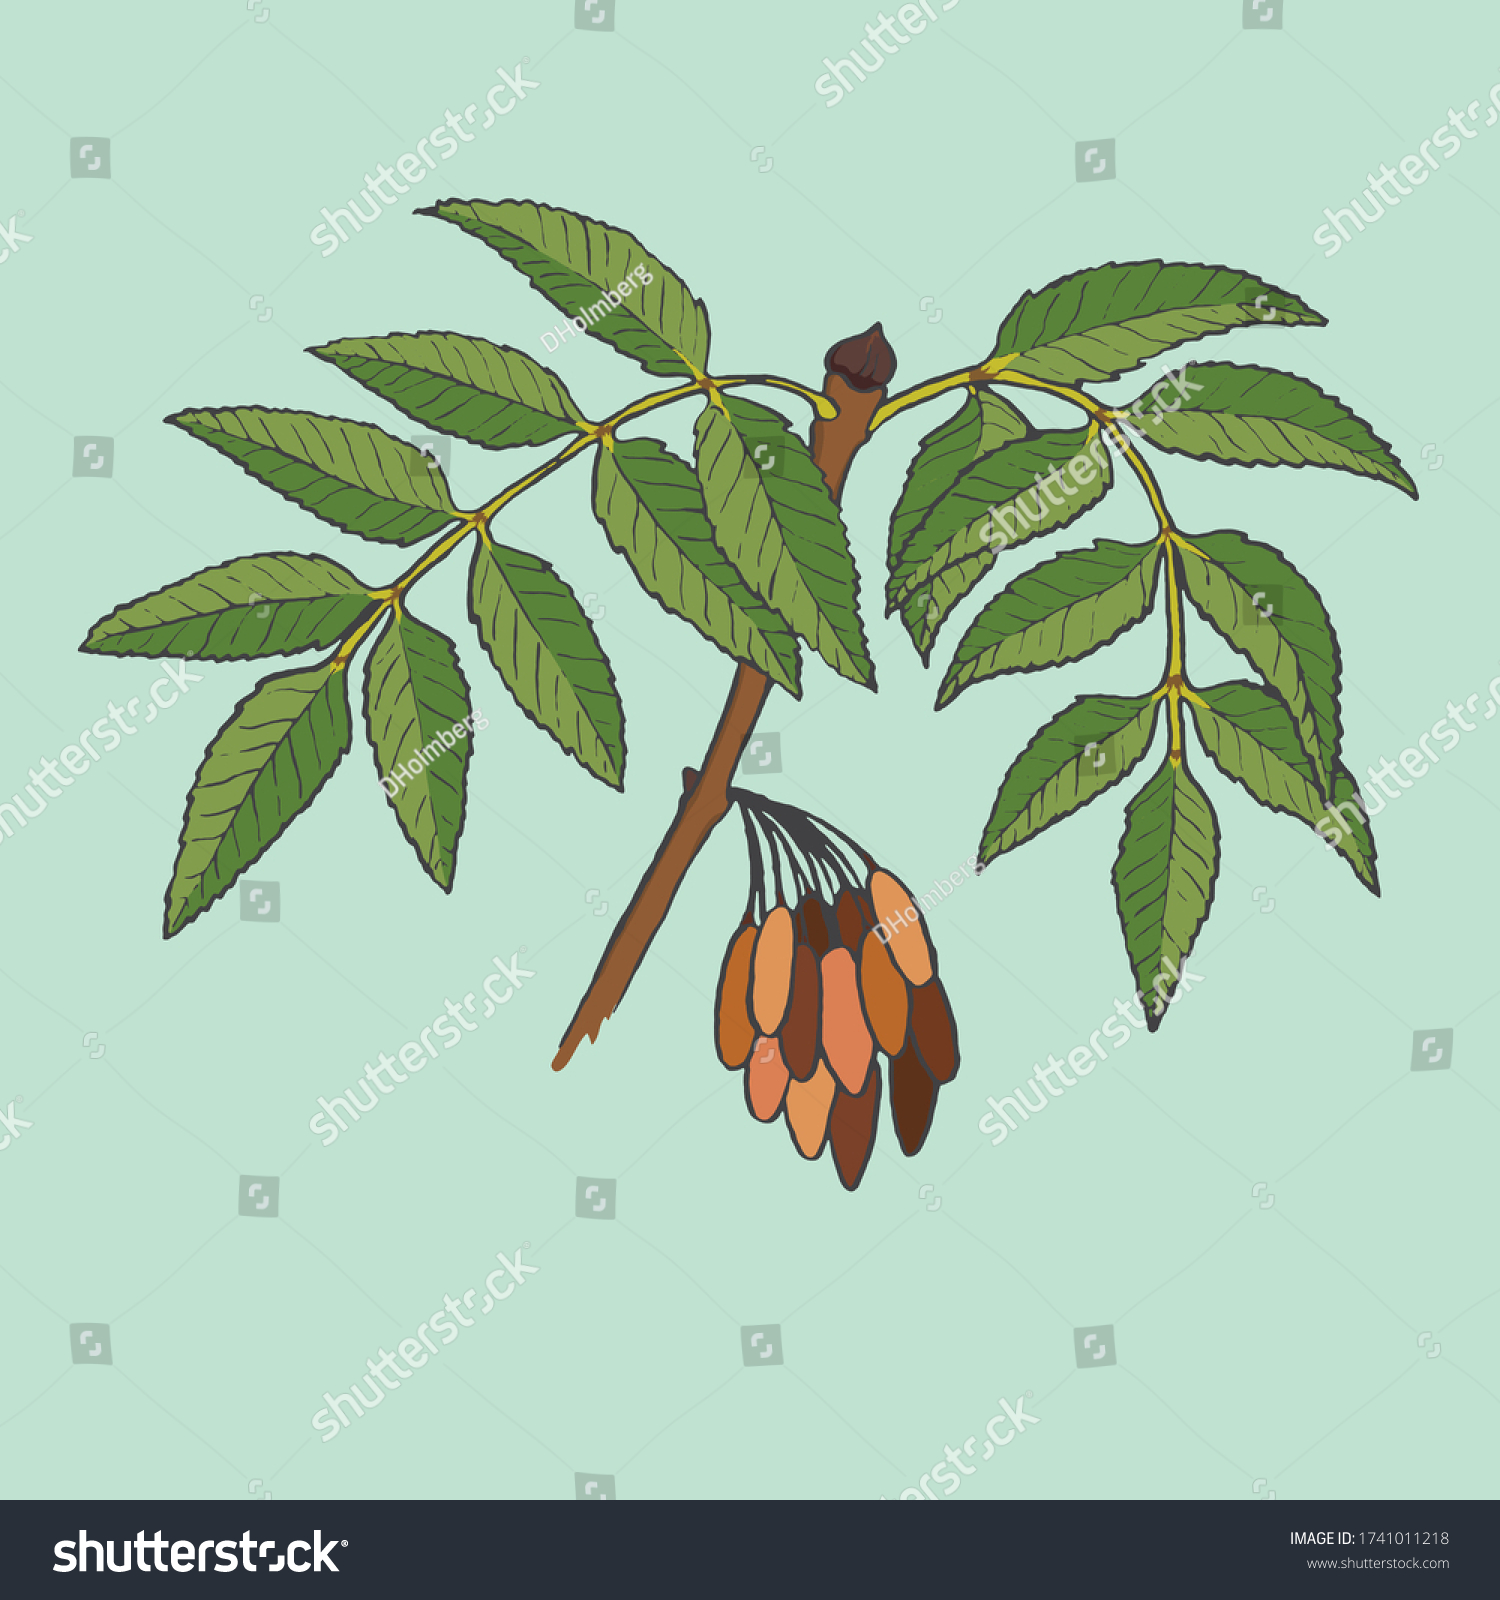 Vector illustration of the leaf of a Fraxinus Excelsior, commonly known as a European ash #1741011218